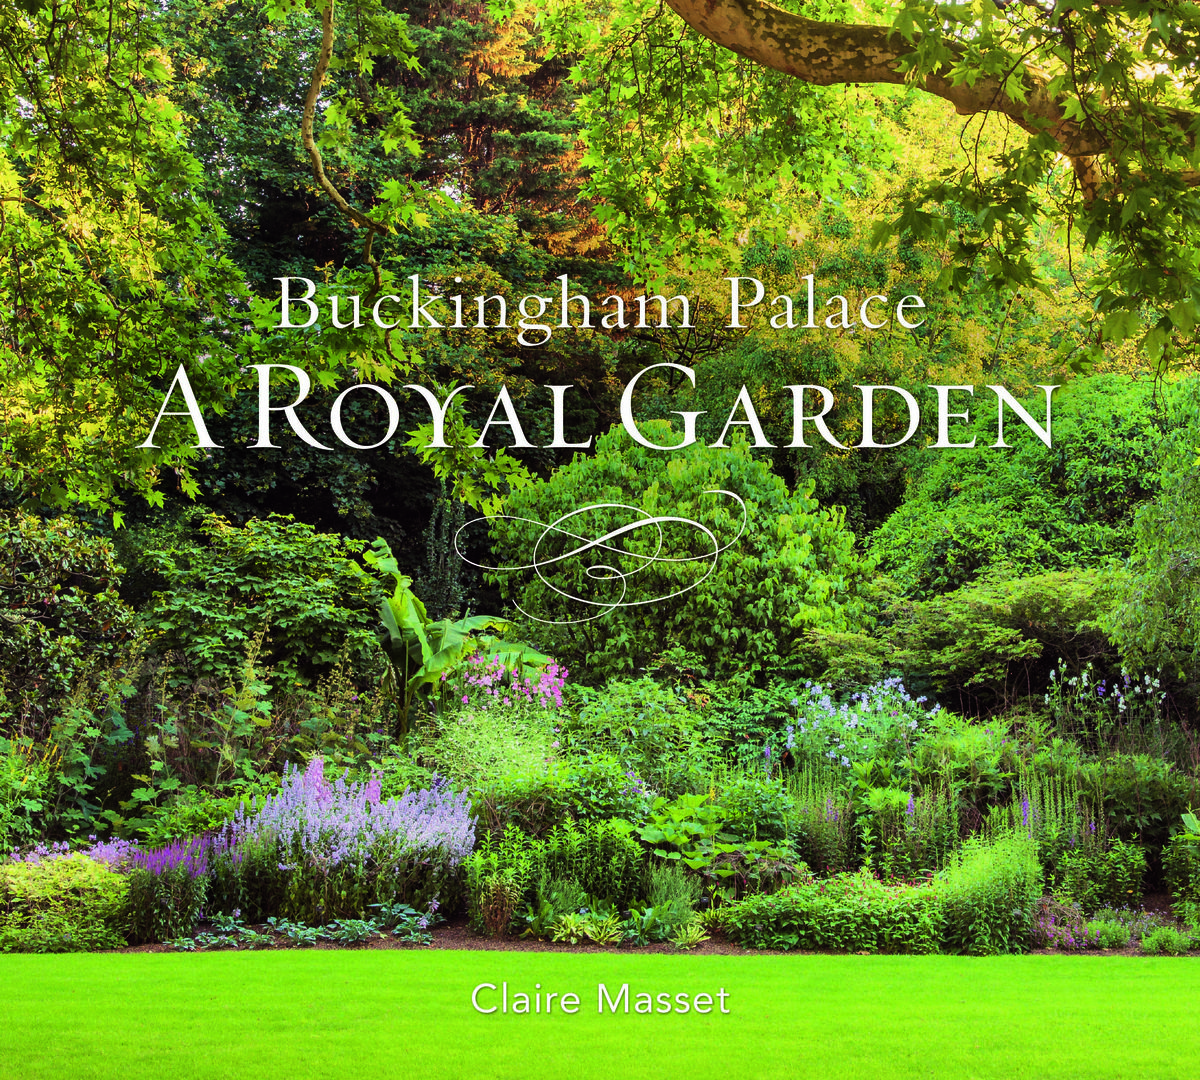 buckingham palace a royal garden book by claire masset